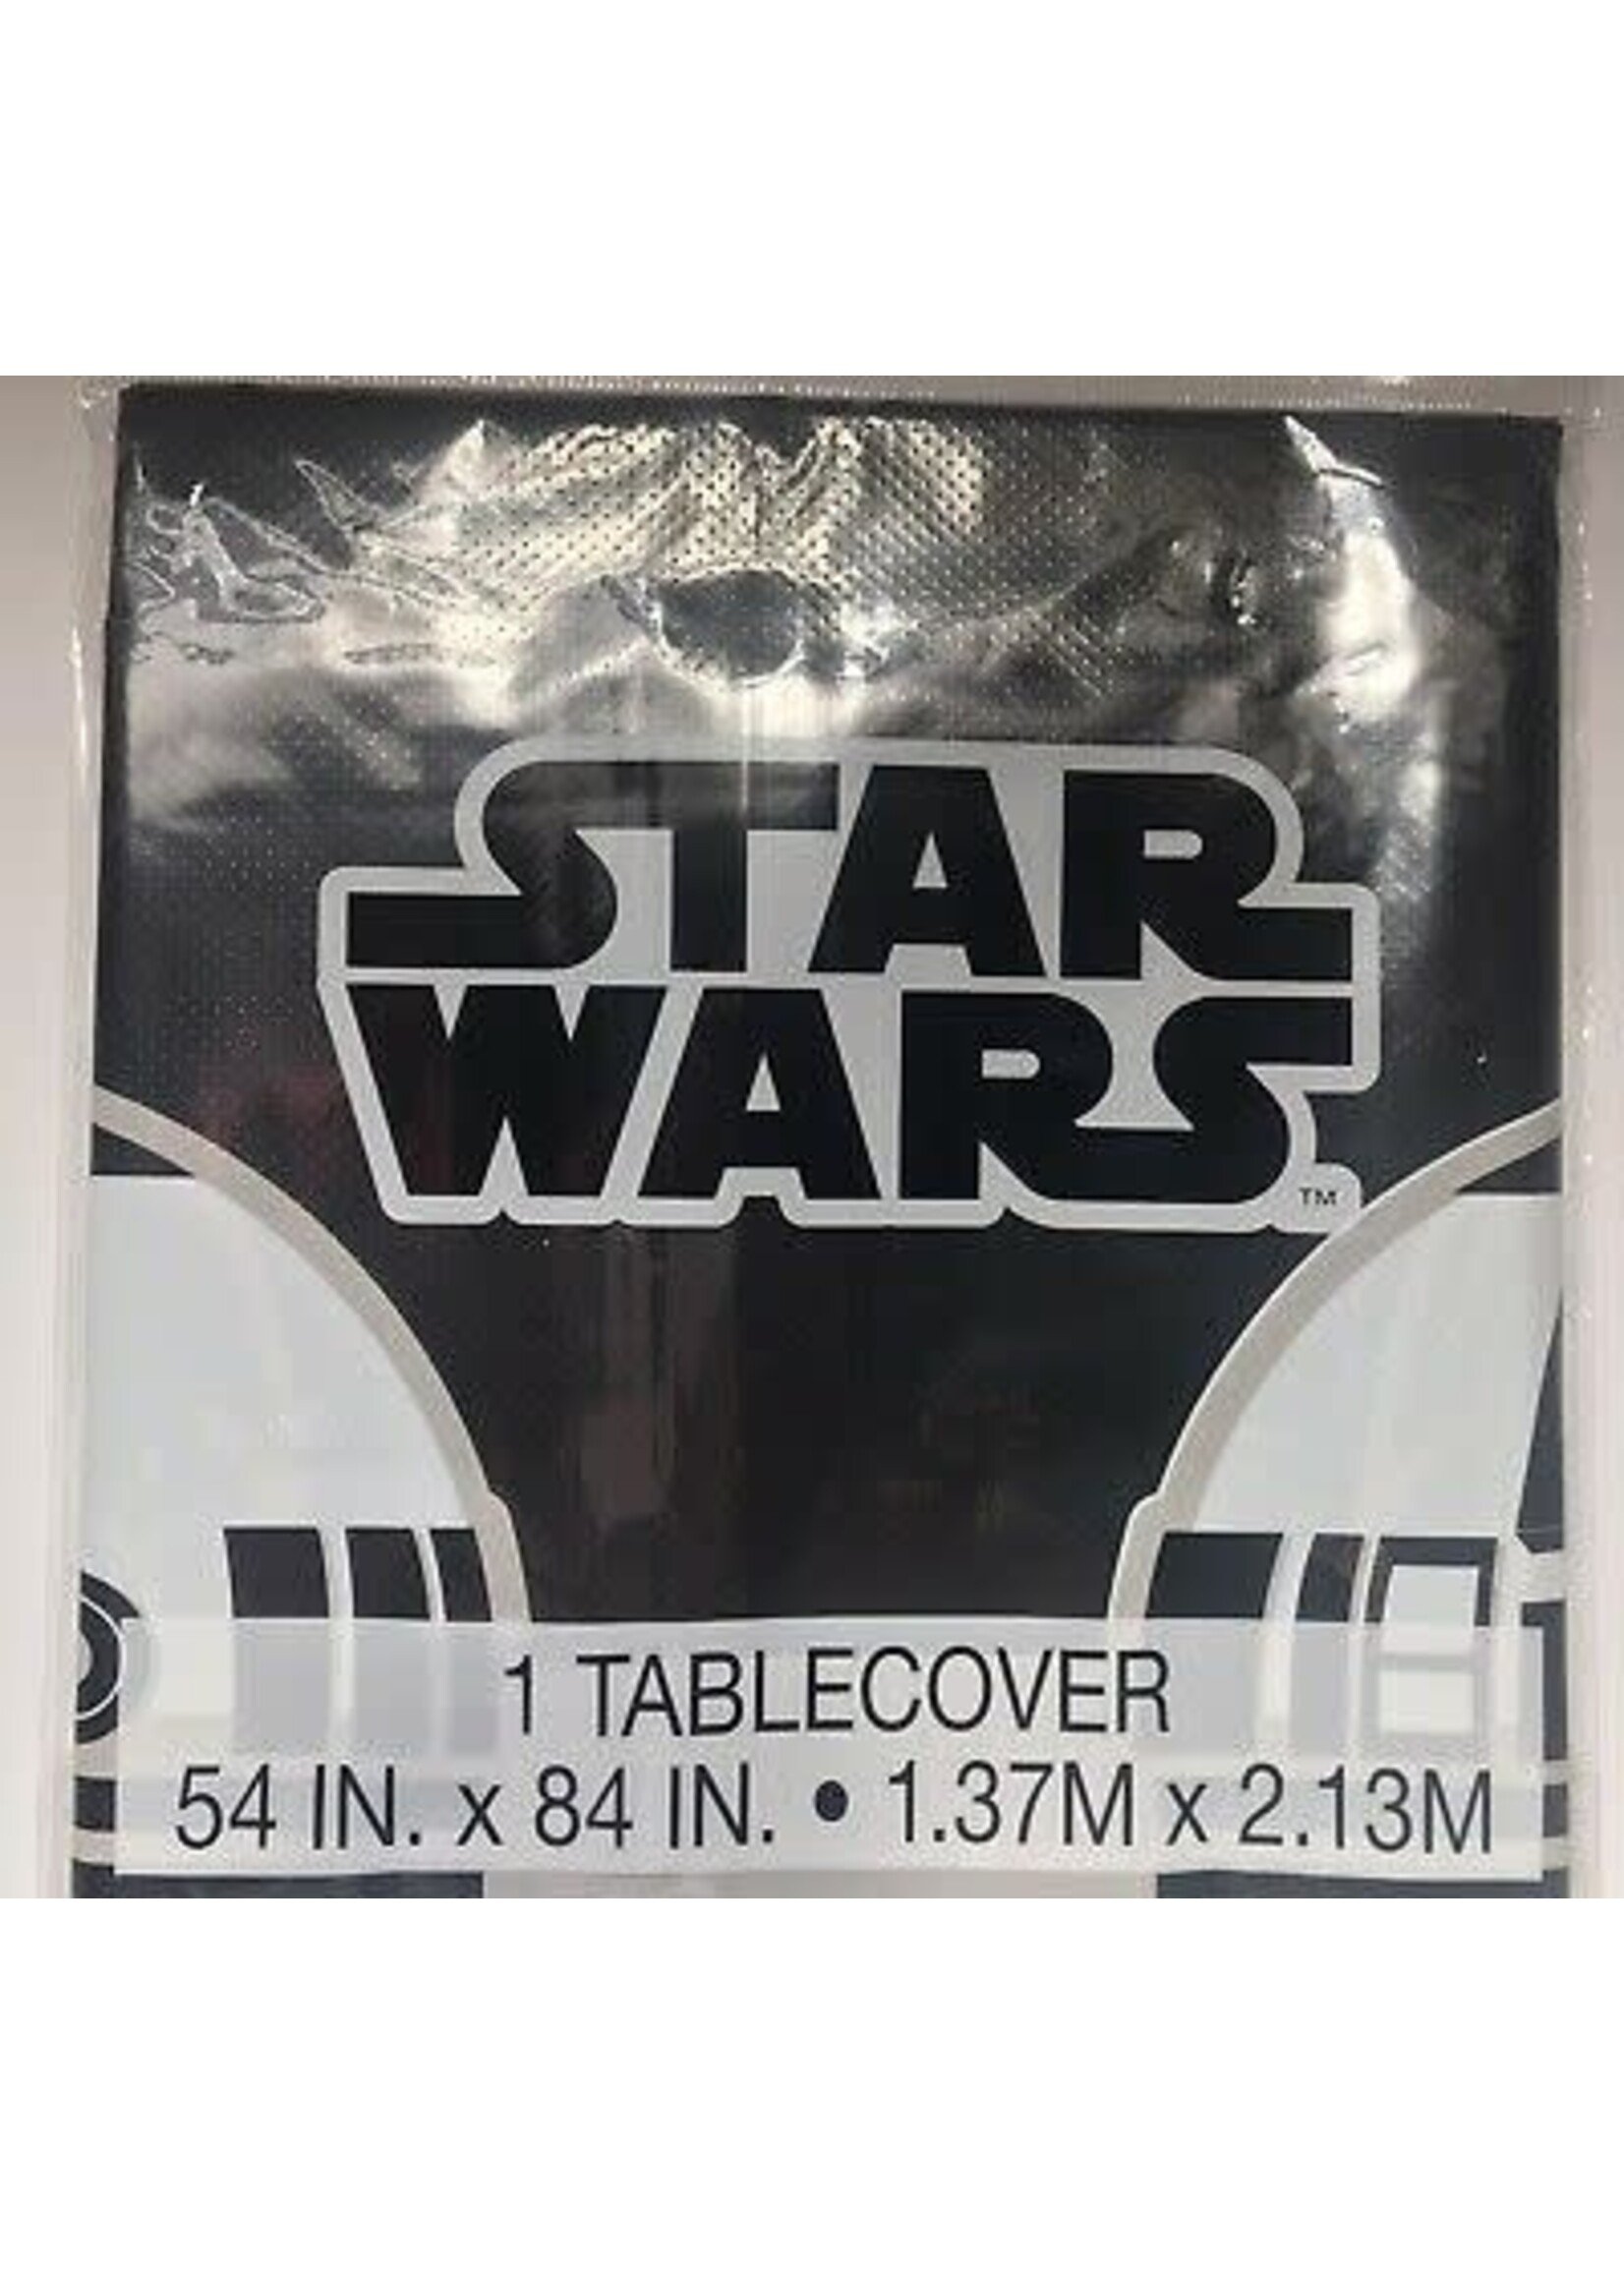 STAR WARS TABLE COVER